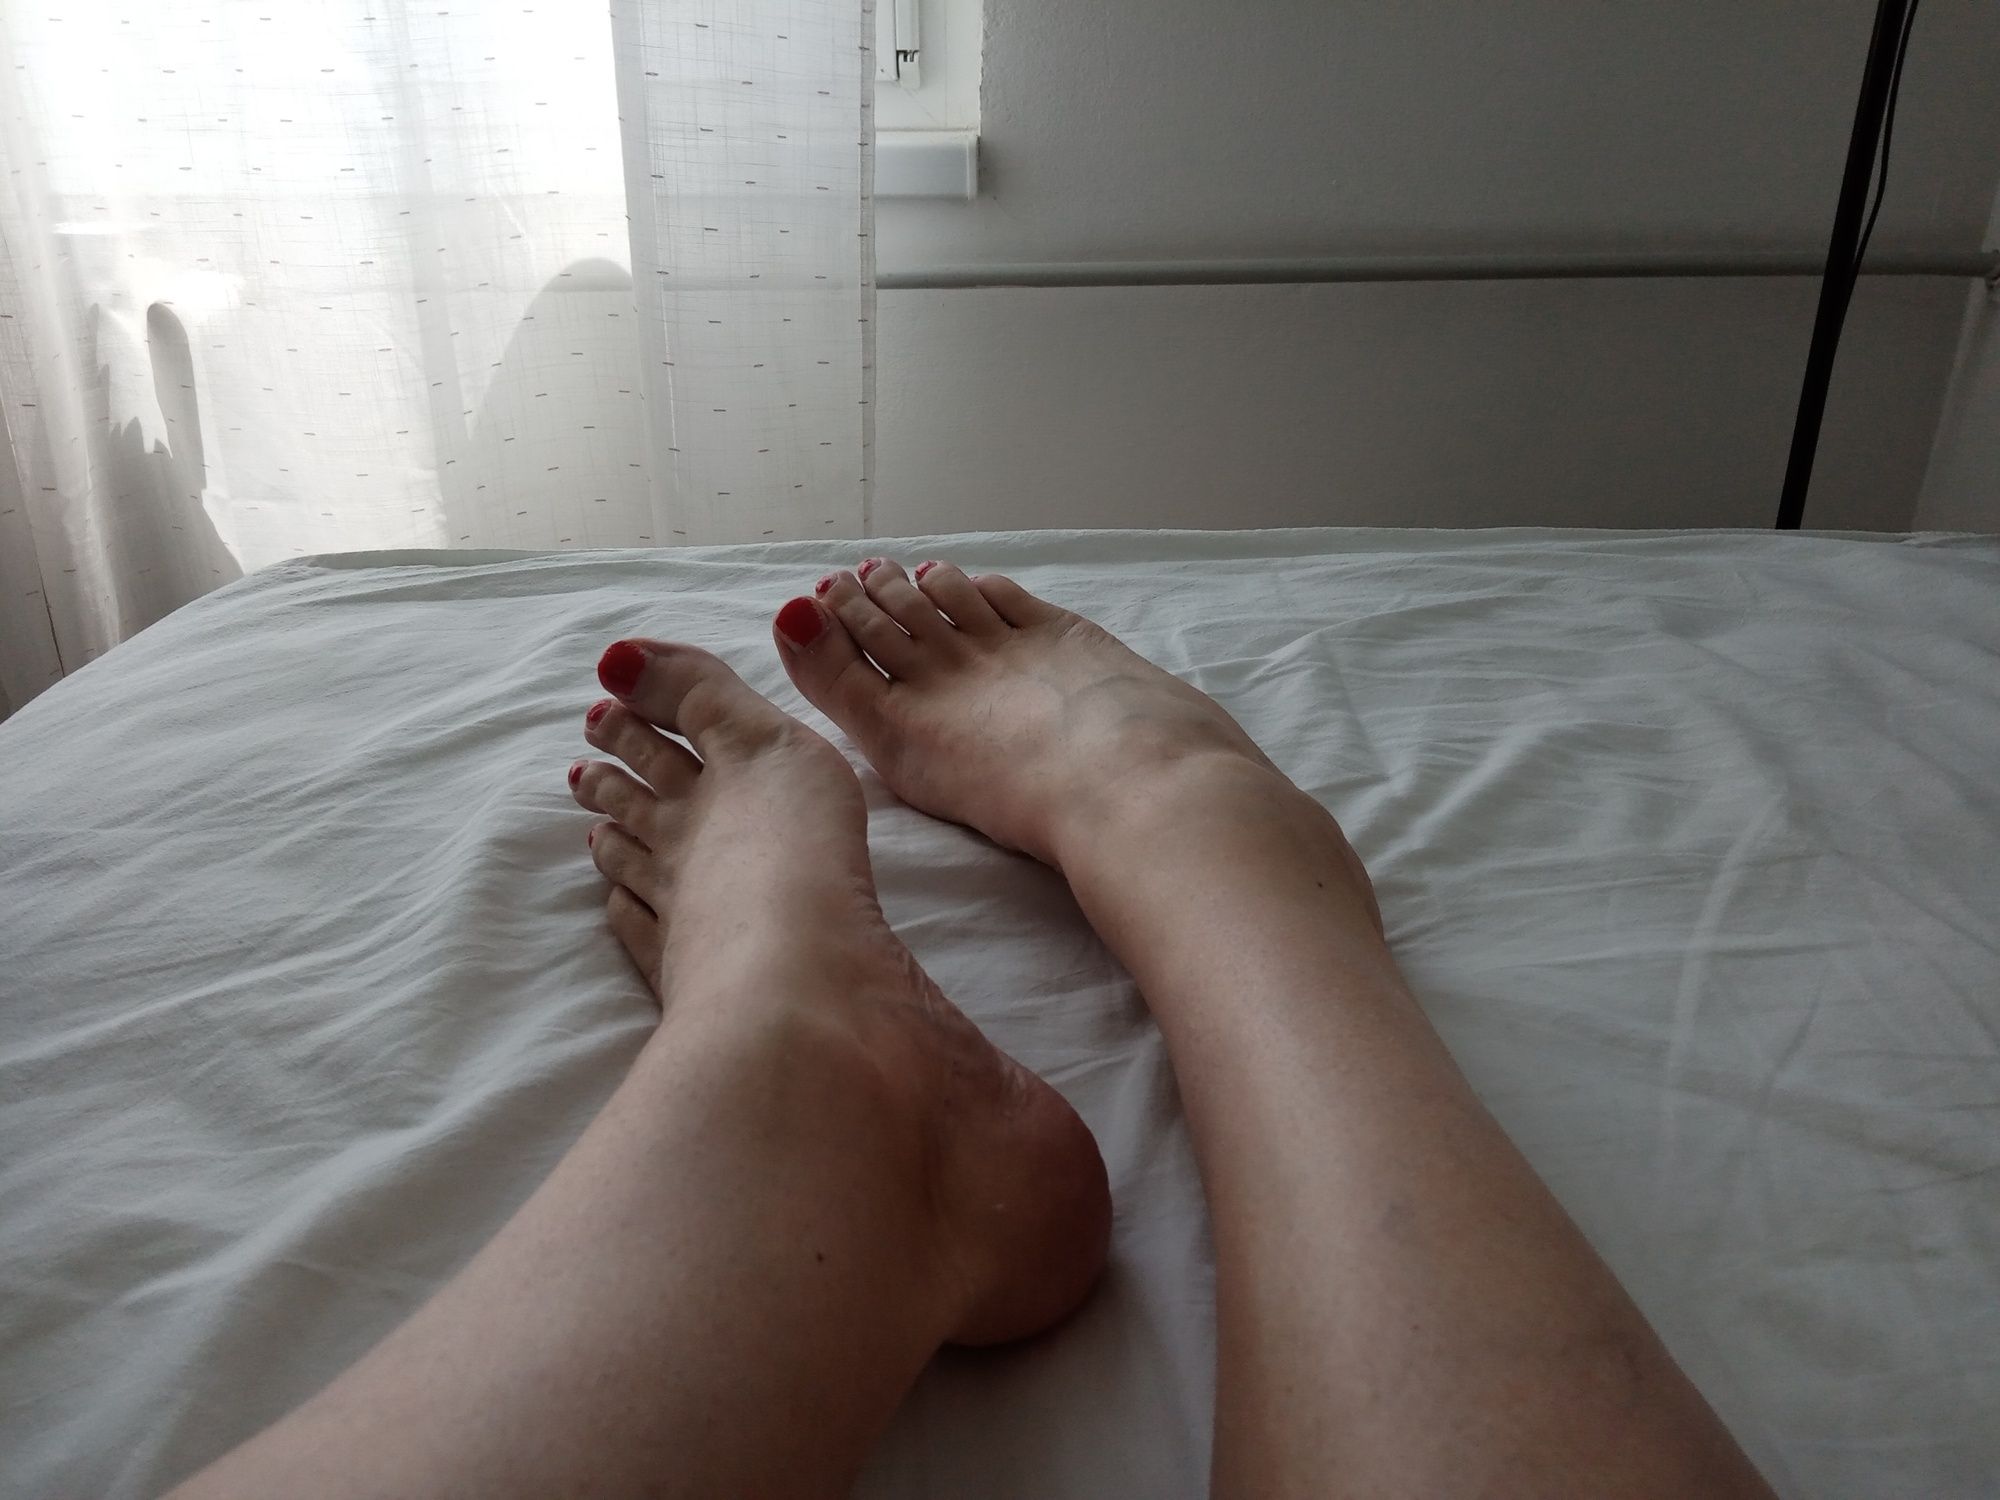 MILF tranny shows off her feet with red painted toes #2